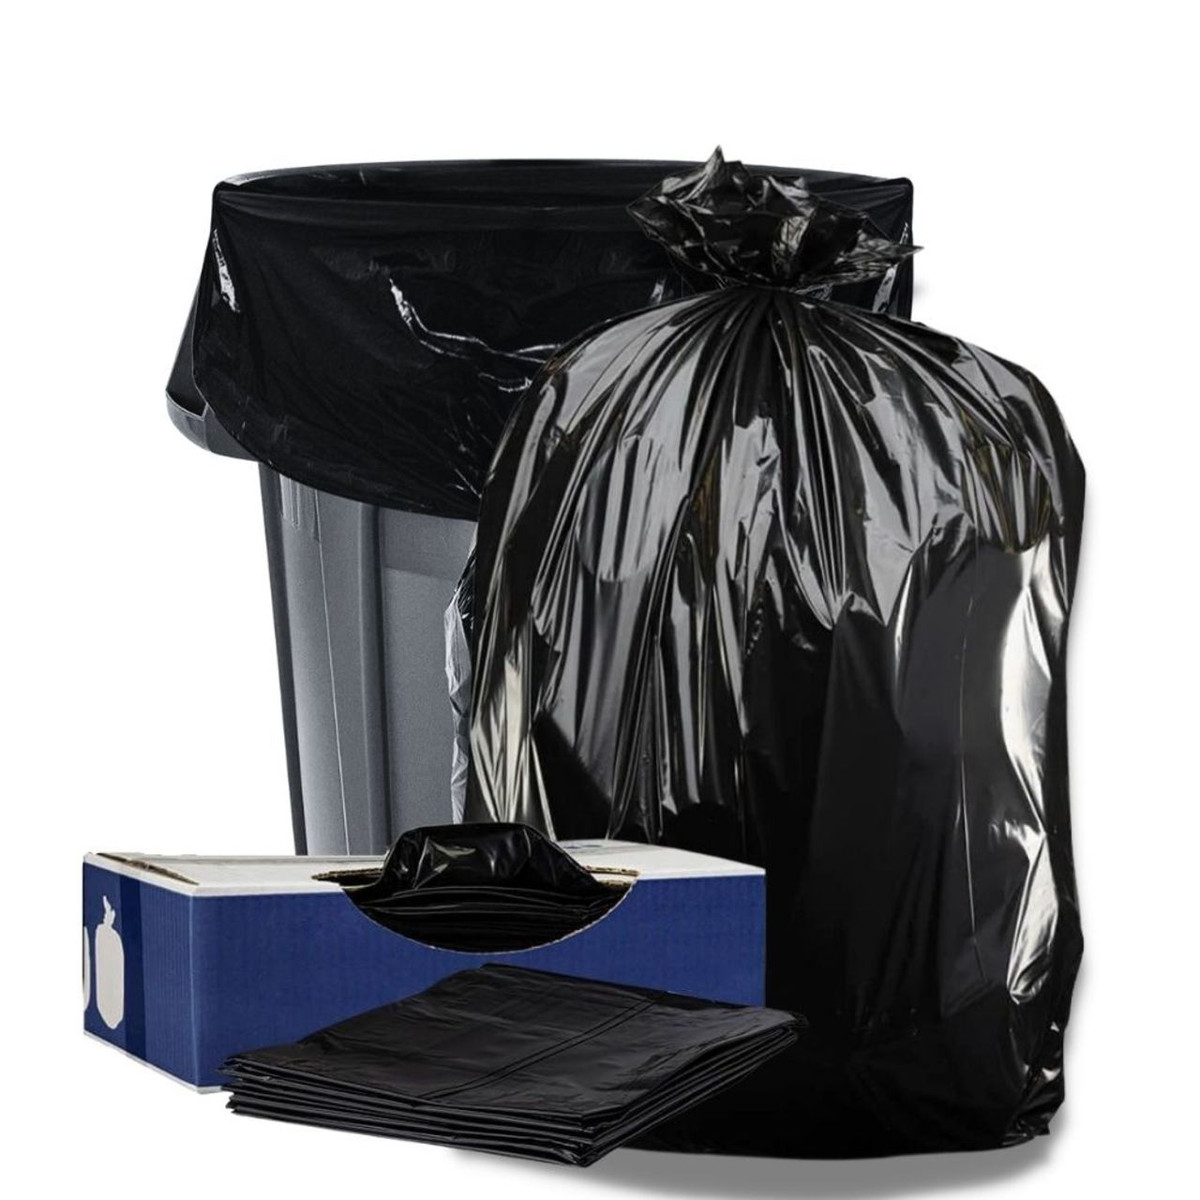 32-33 Gallon Clear Trash Bags, (Value Pack 100 Bags w/Ties) Large